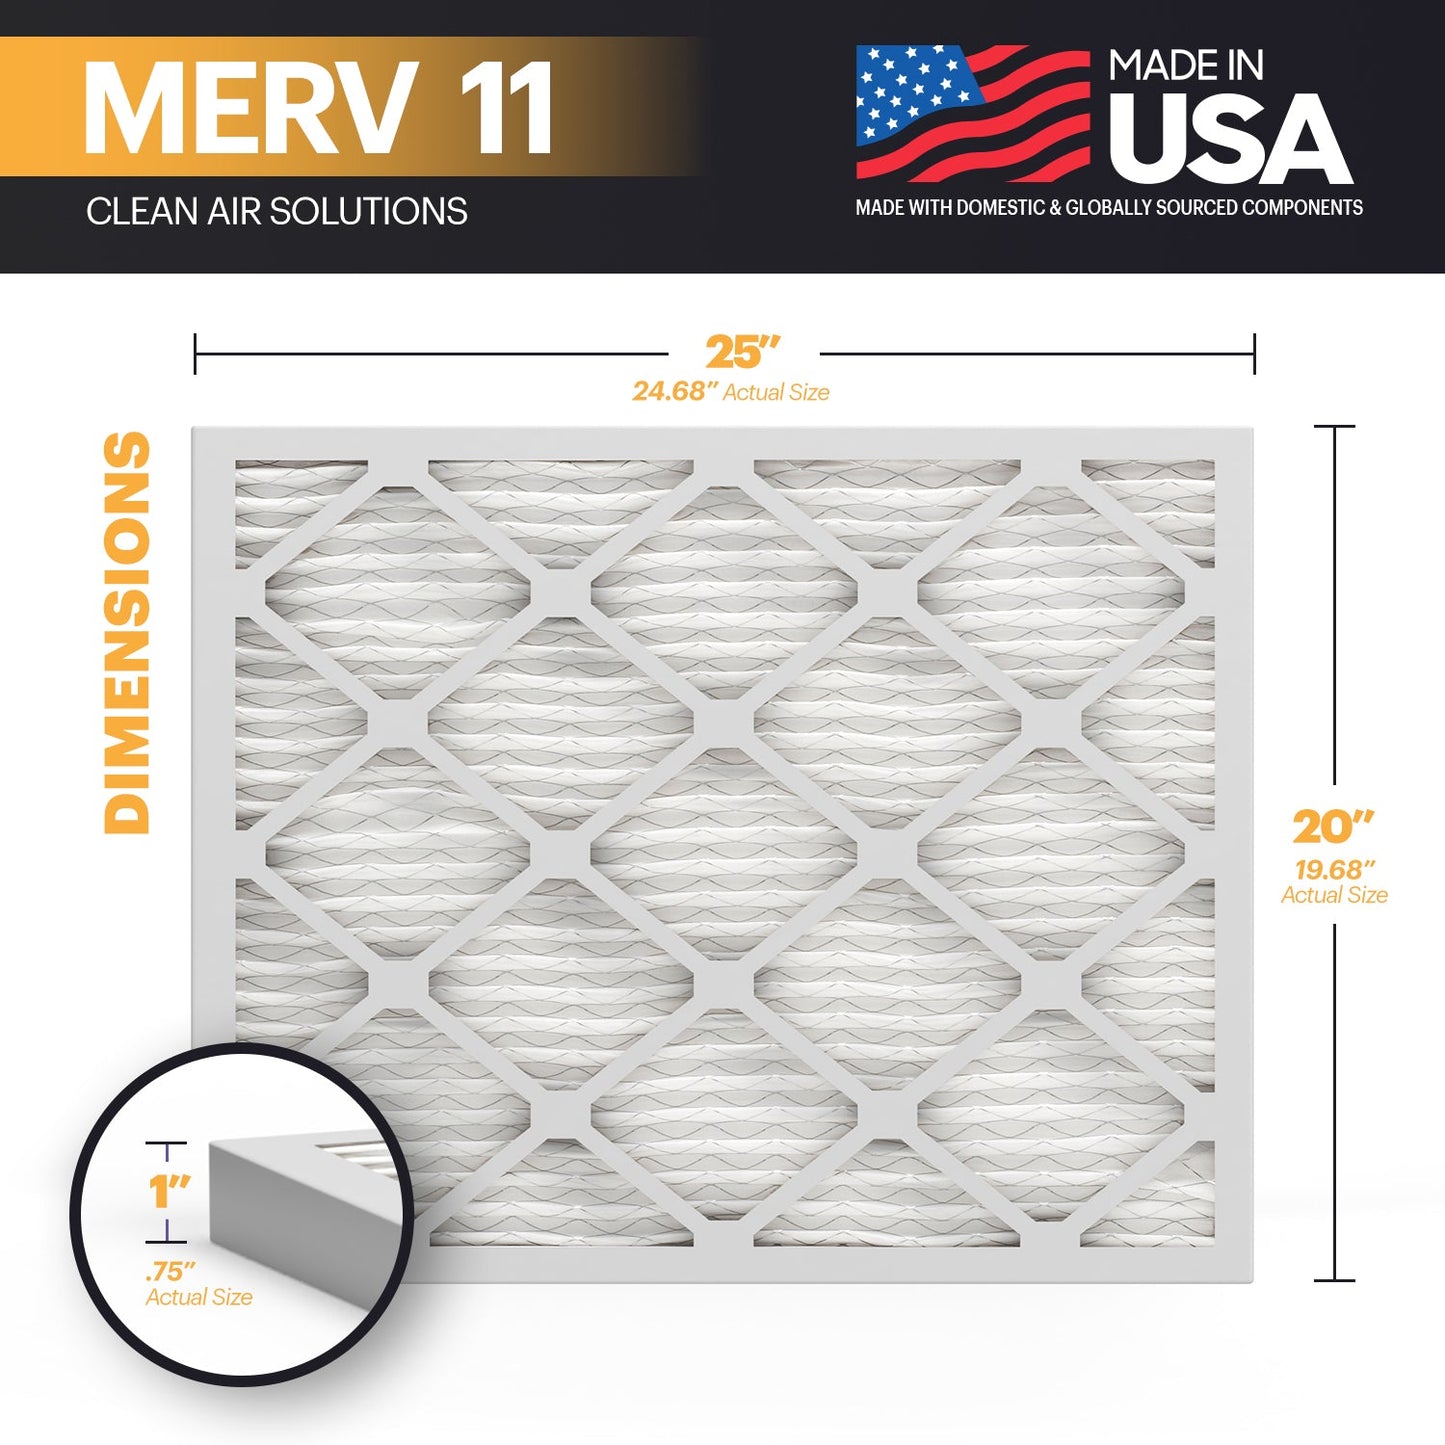 BNX 20x25x1 MERV 11 Air Filter 10 Pack - MADE IN USA - Electrostatic Pleated Air Conditioner HVAC AC Furnace Filters - Removes Dust, Mold, Pollen, Lint, Pet Dander, Smoke, Smog